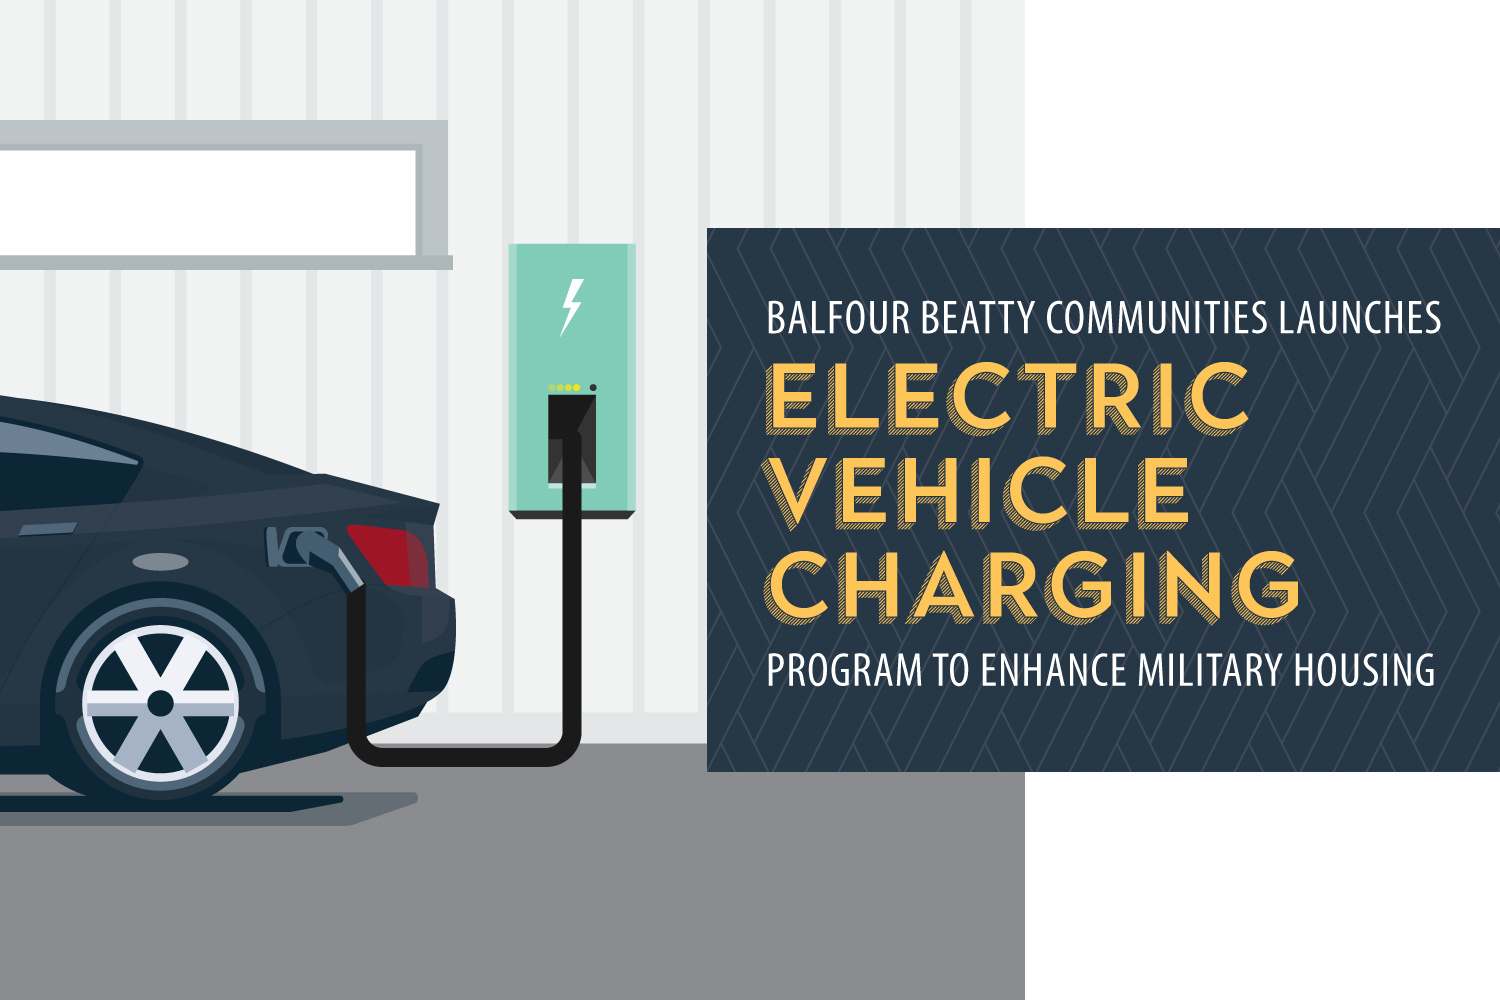 Balfour Beatty Communities Launches Electric Vehicle Charging Program to Enhance Military Housing 